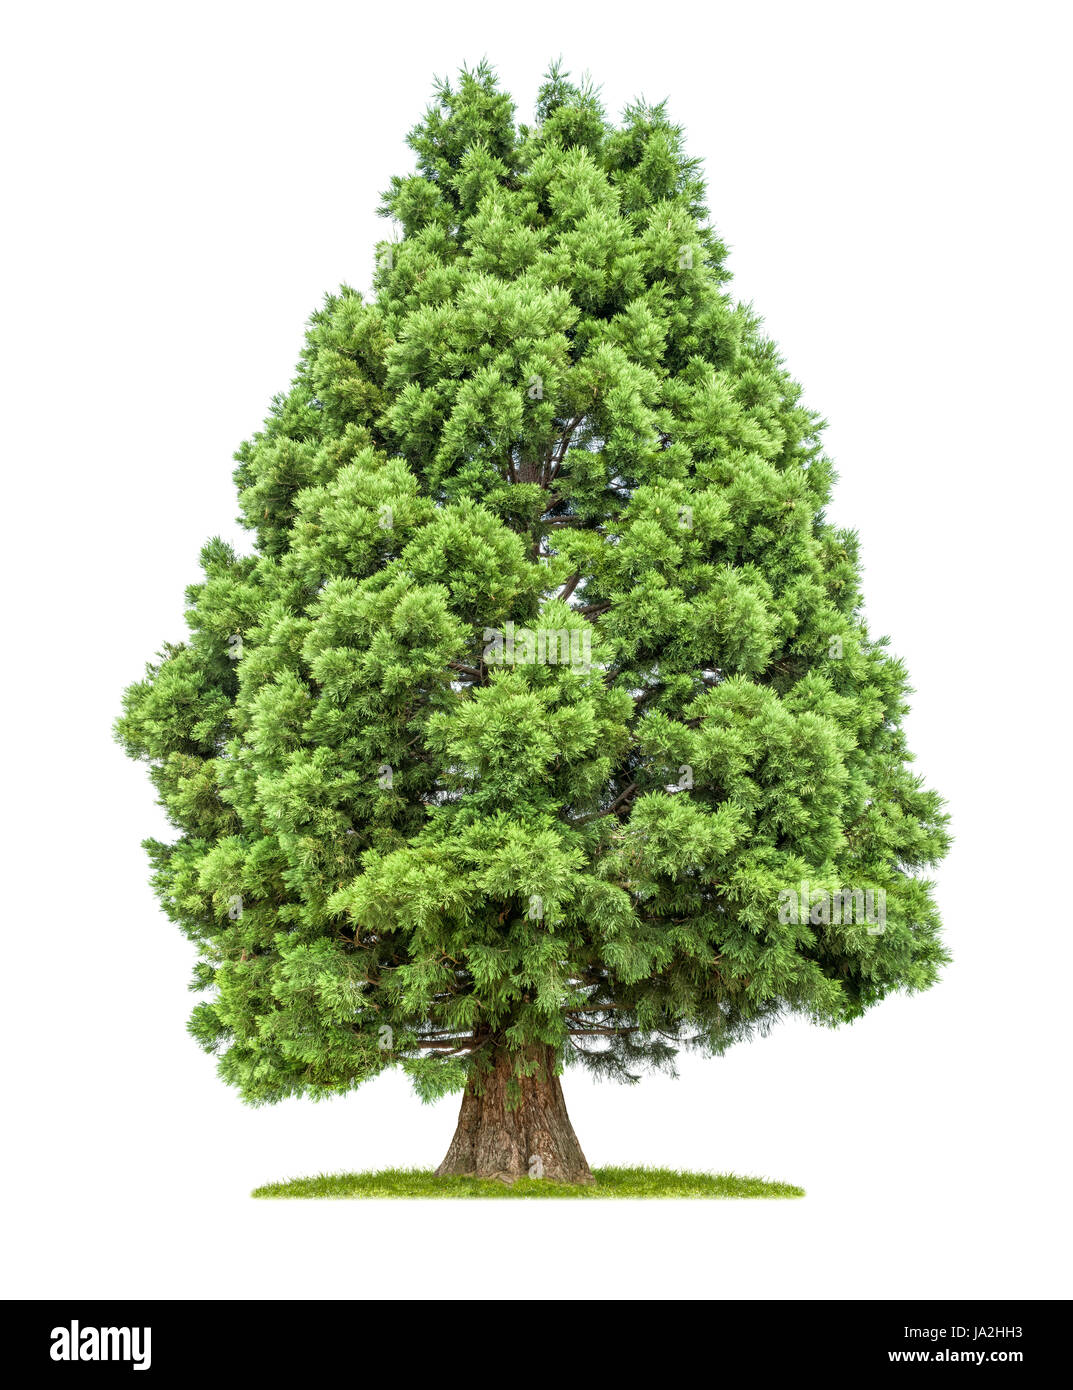 exempted sequoia in front of white background Stock Photo